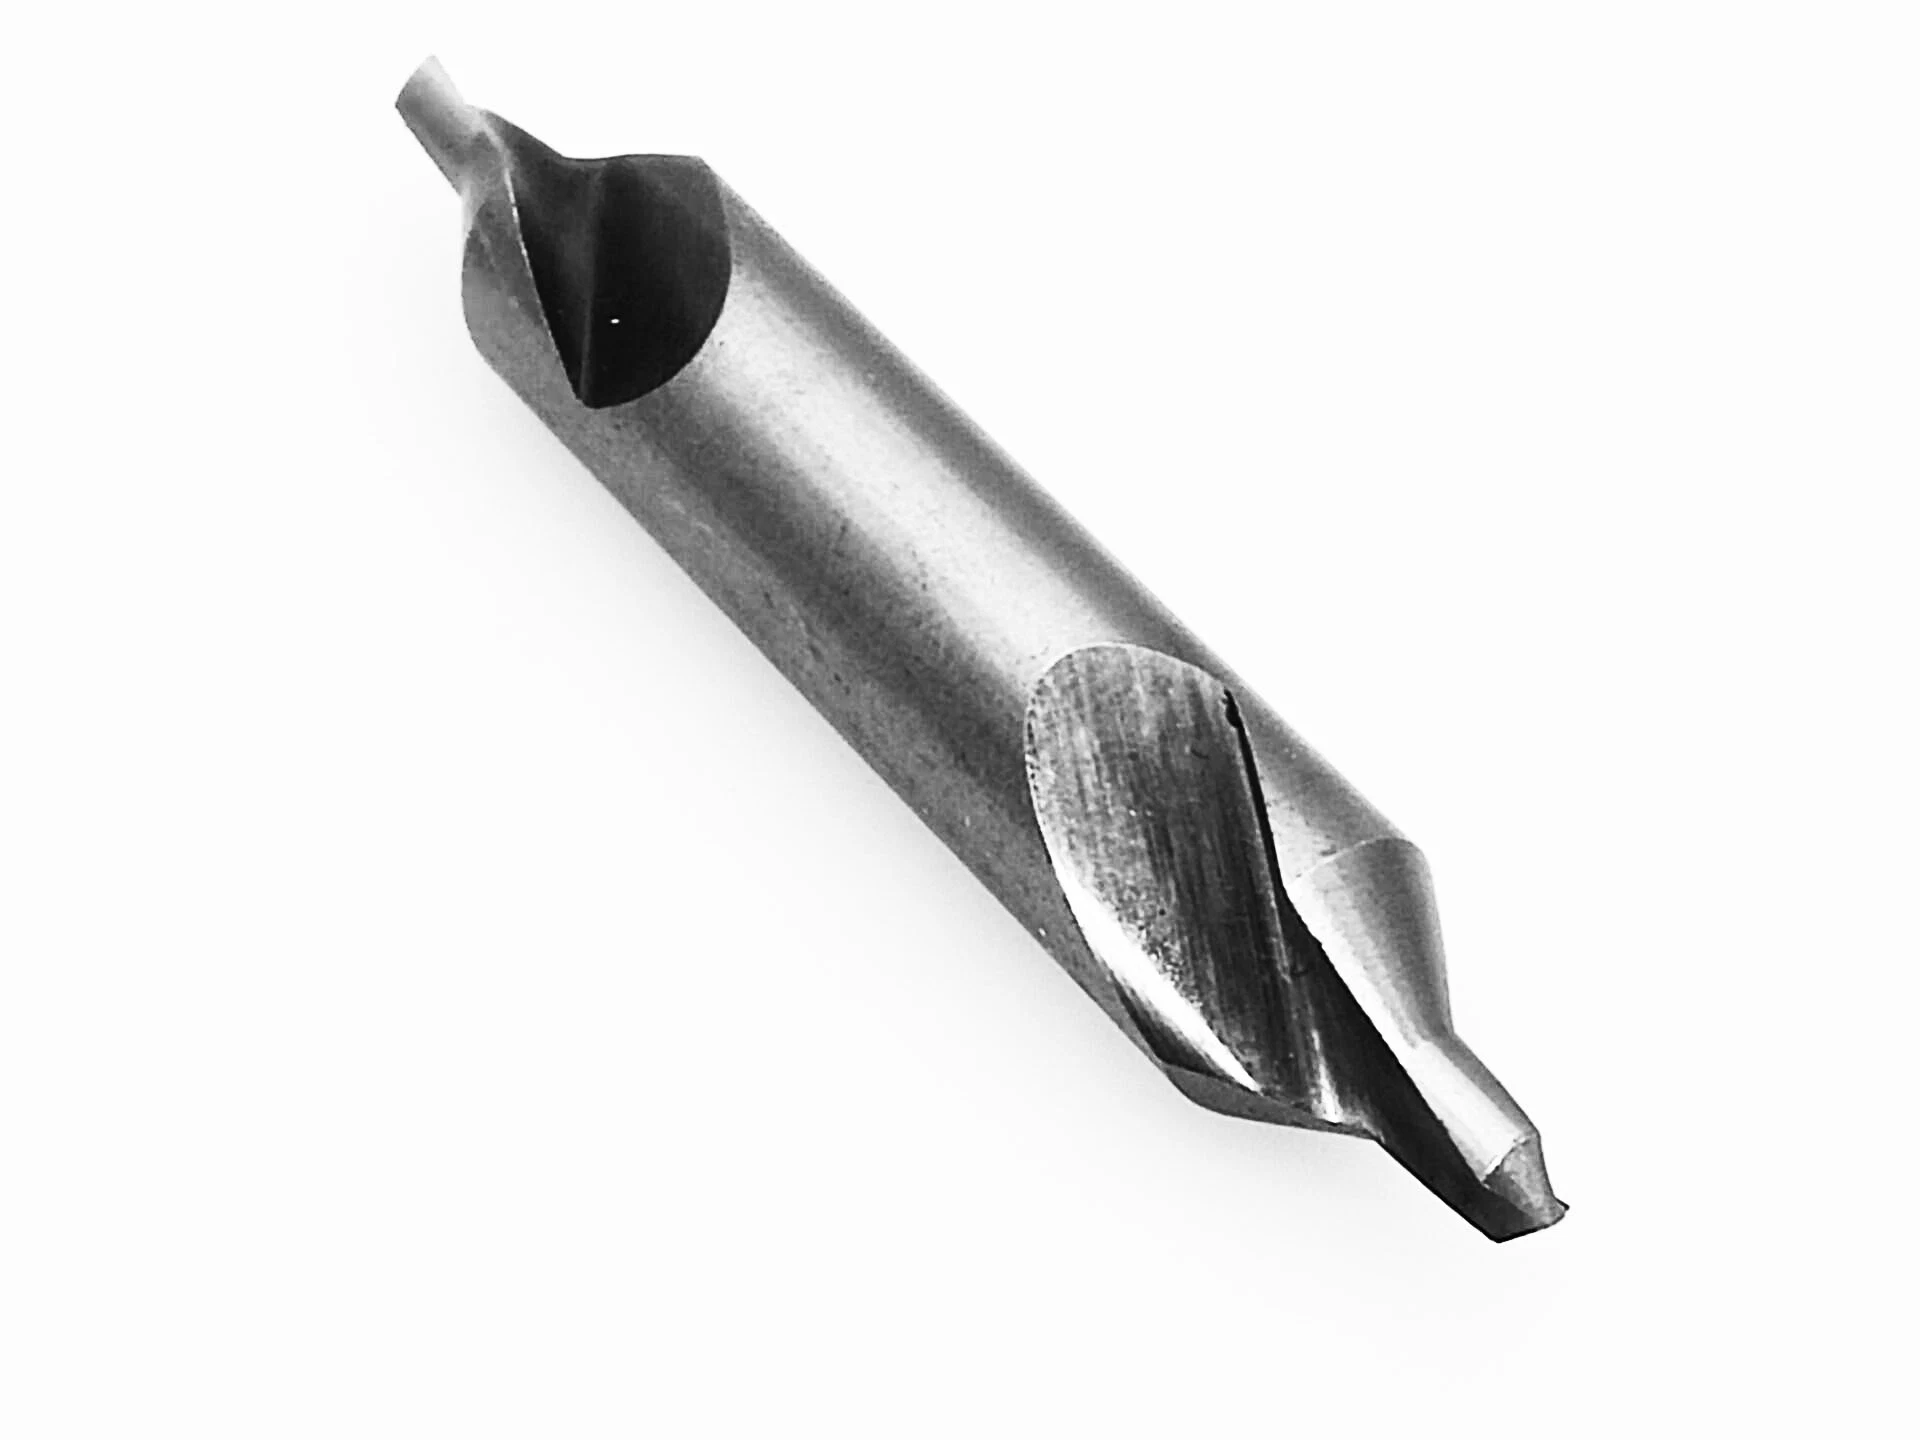 HSS Double End Drill Bits